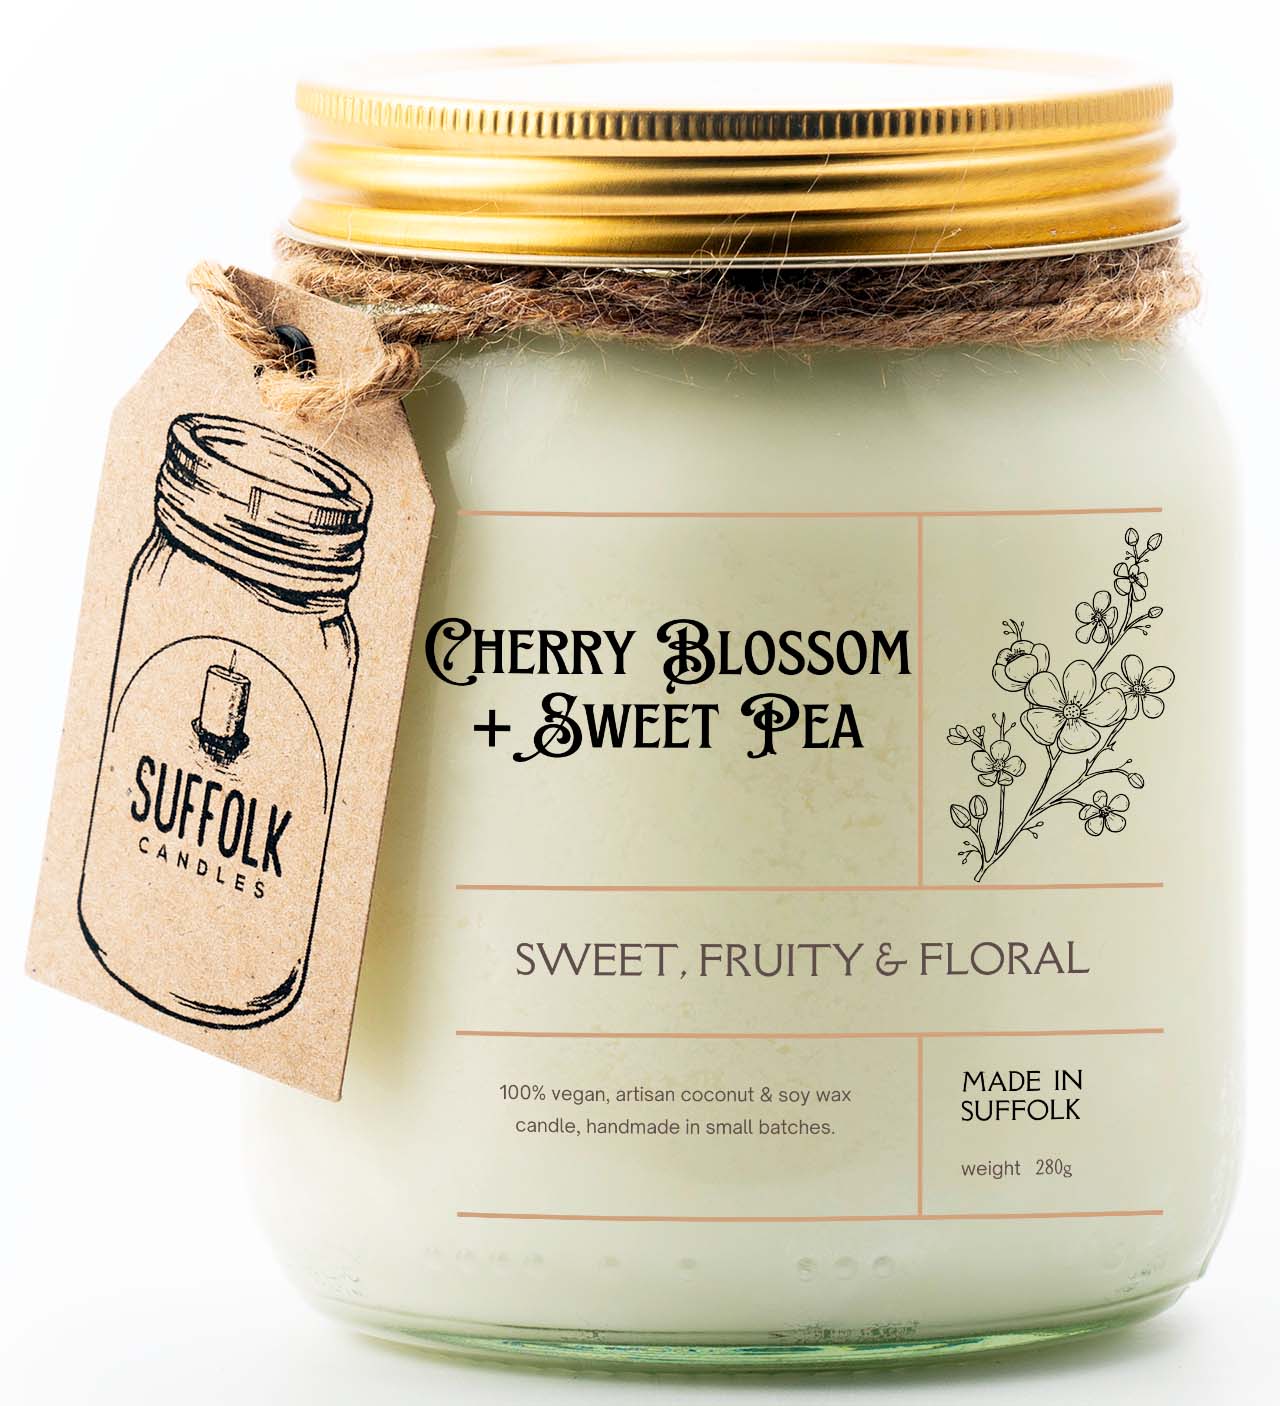 Cherry Blossom & Sweet Pea Scented Candle Jar | Floral Scent of Sweet Pea, Muguet, Jasmine and Fresh Lemon